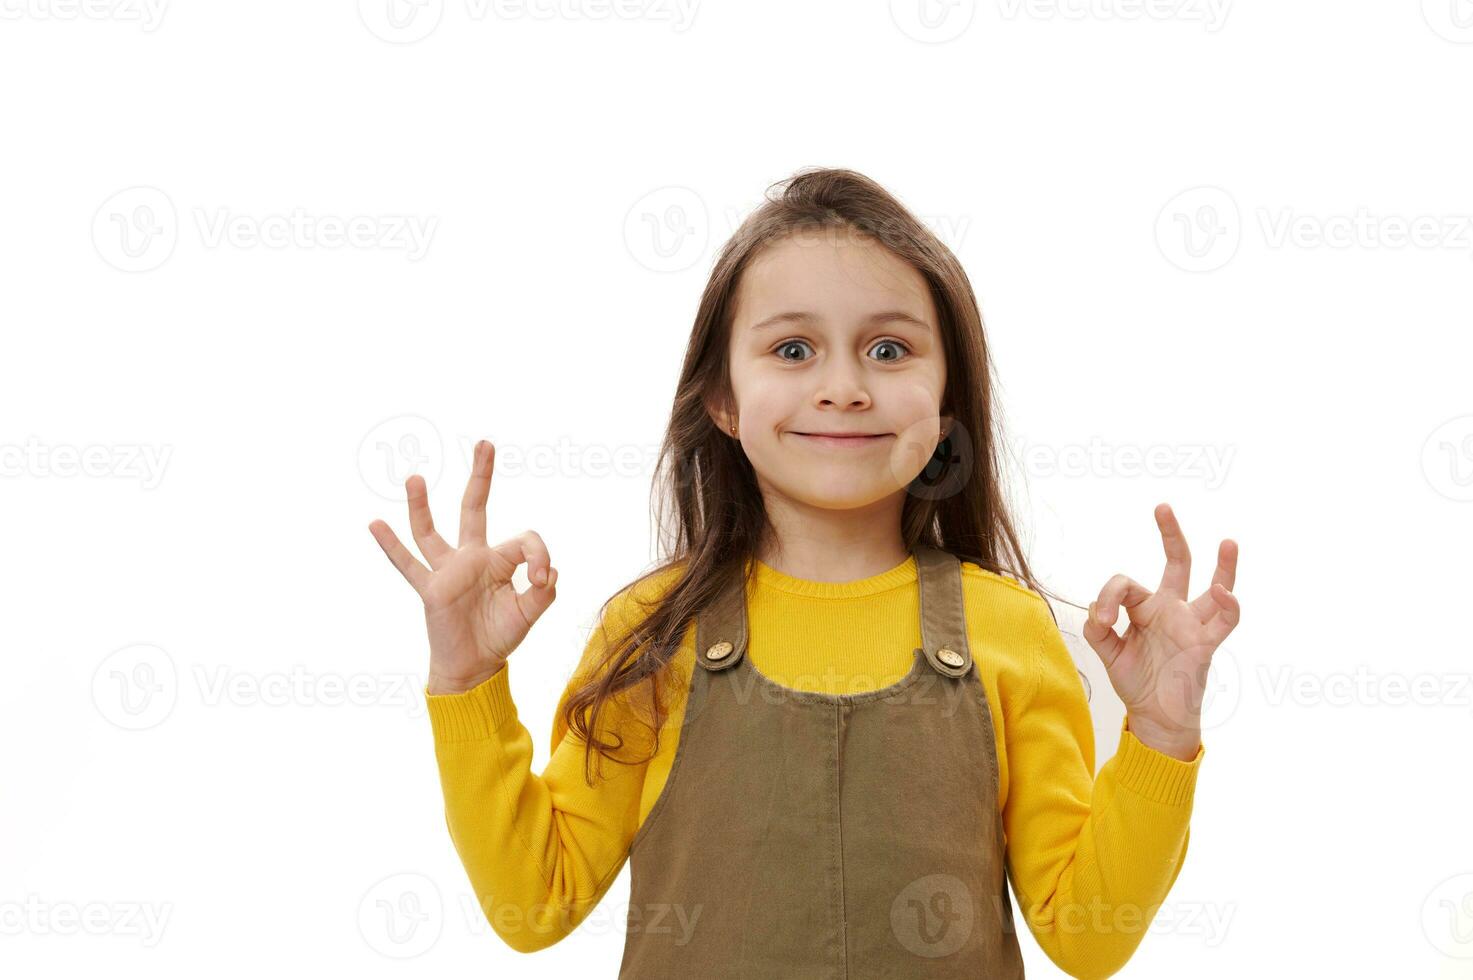 Mischievous smiling little child girl showing OK sign, expressing hapiness and positive emotions over white background photo